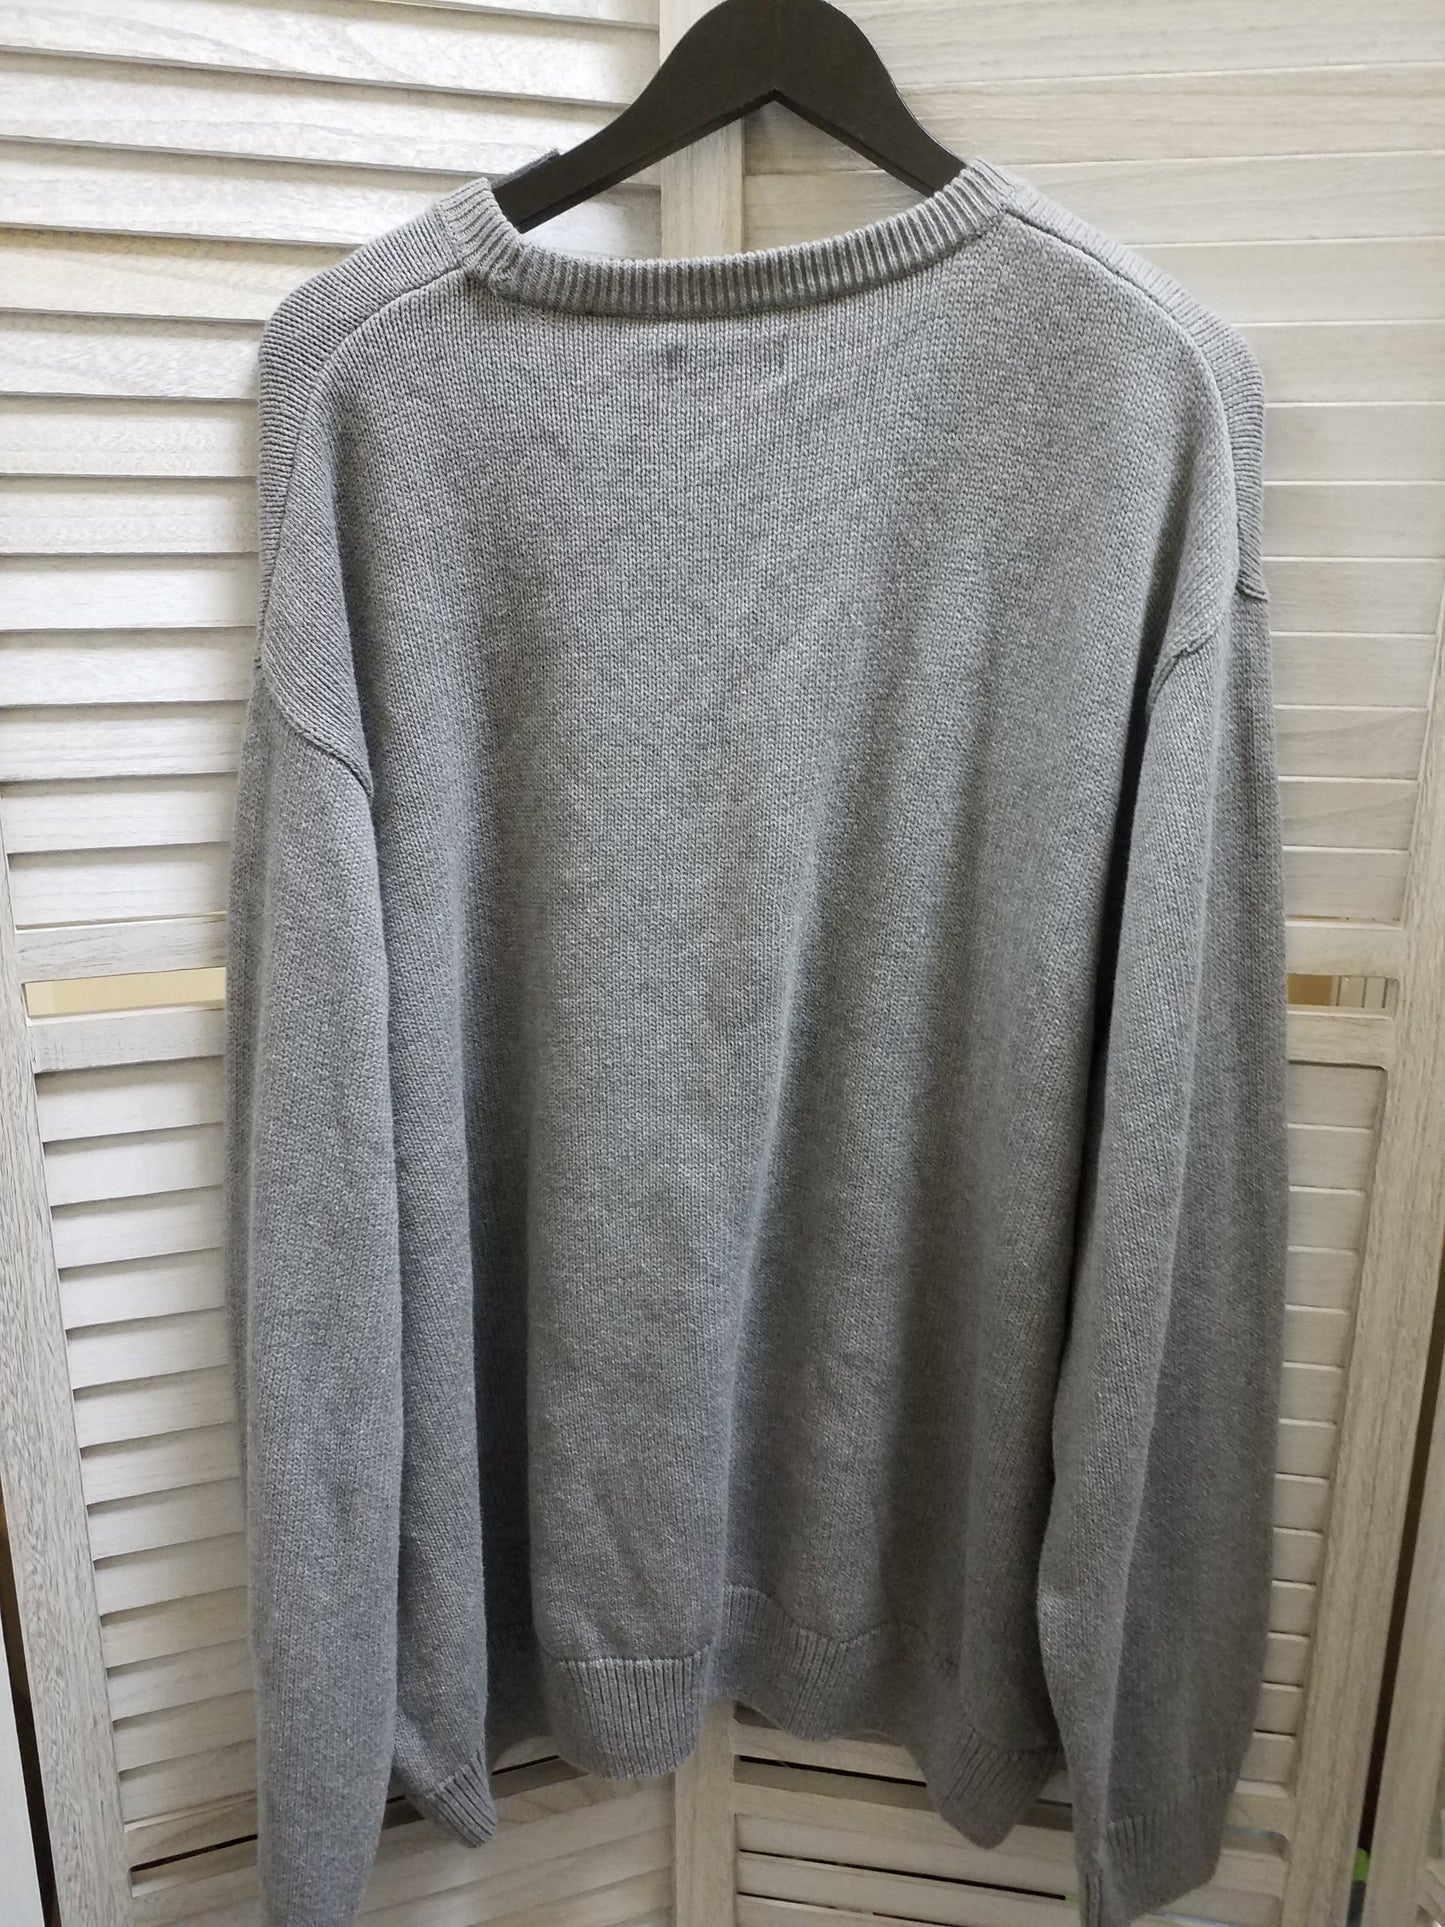 Sweater By Chaps  Size: 4x